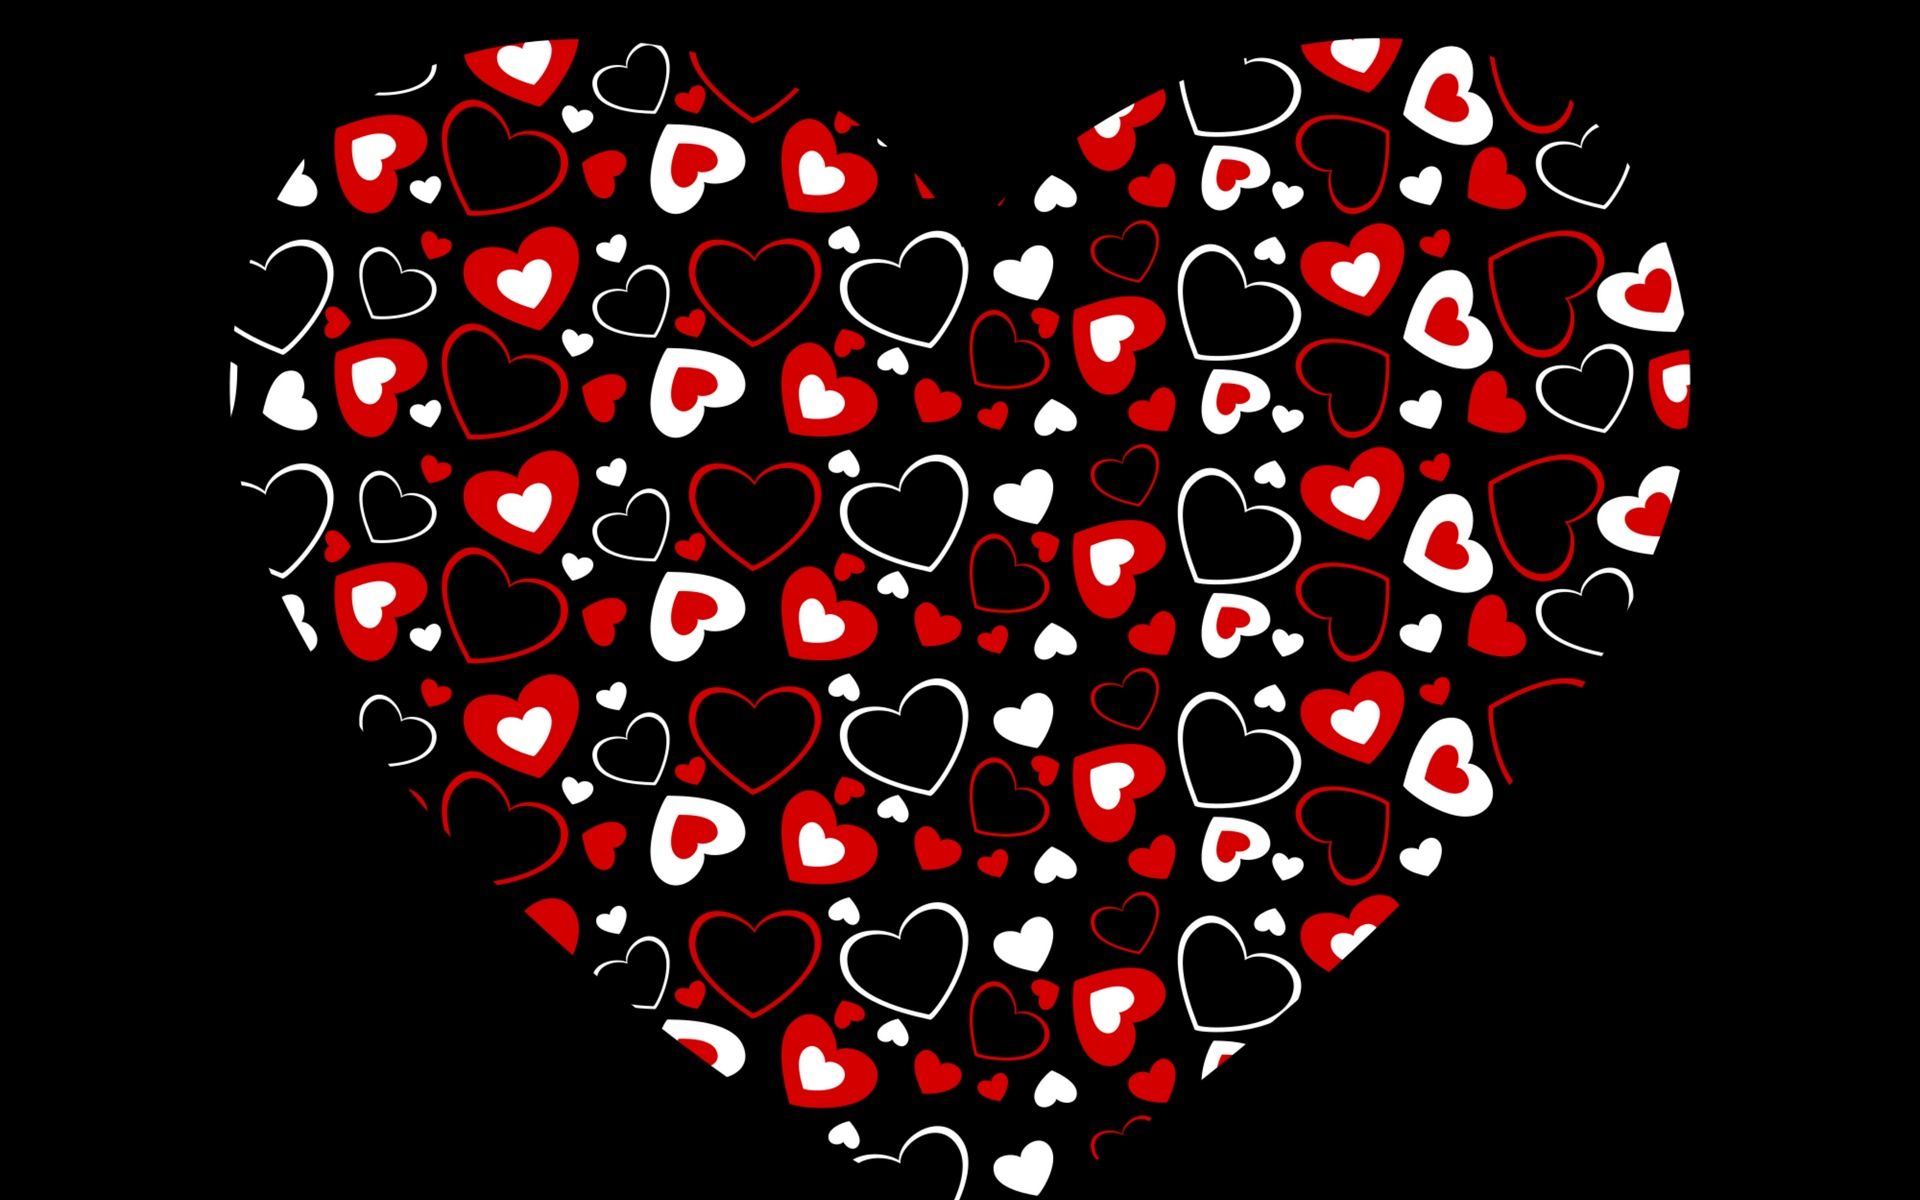 All Black Red Heart Wallpapers on WallpaperDog